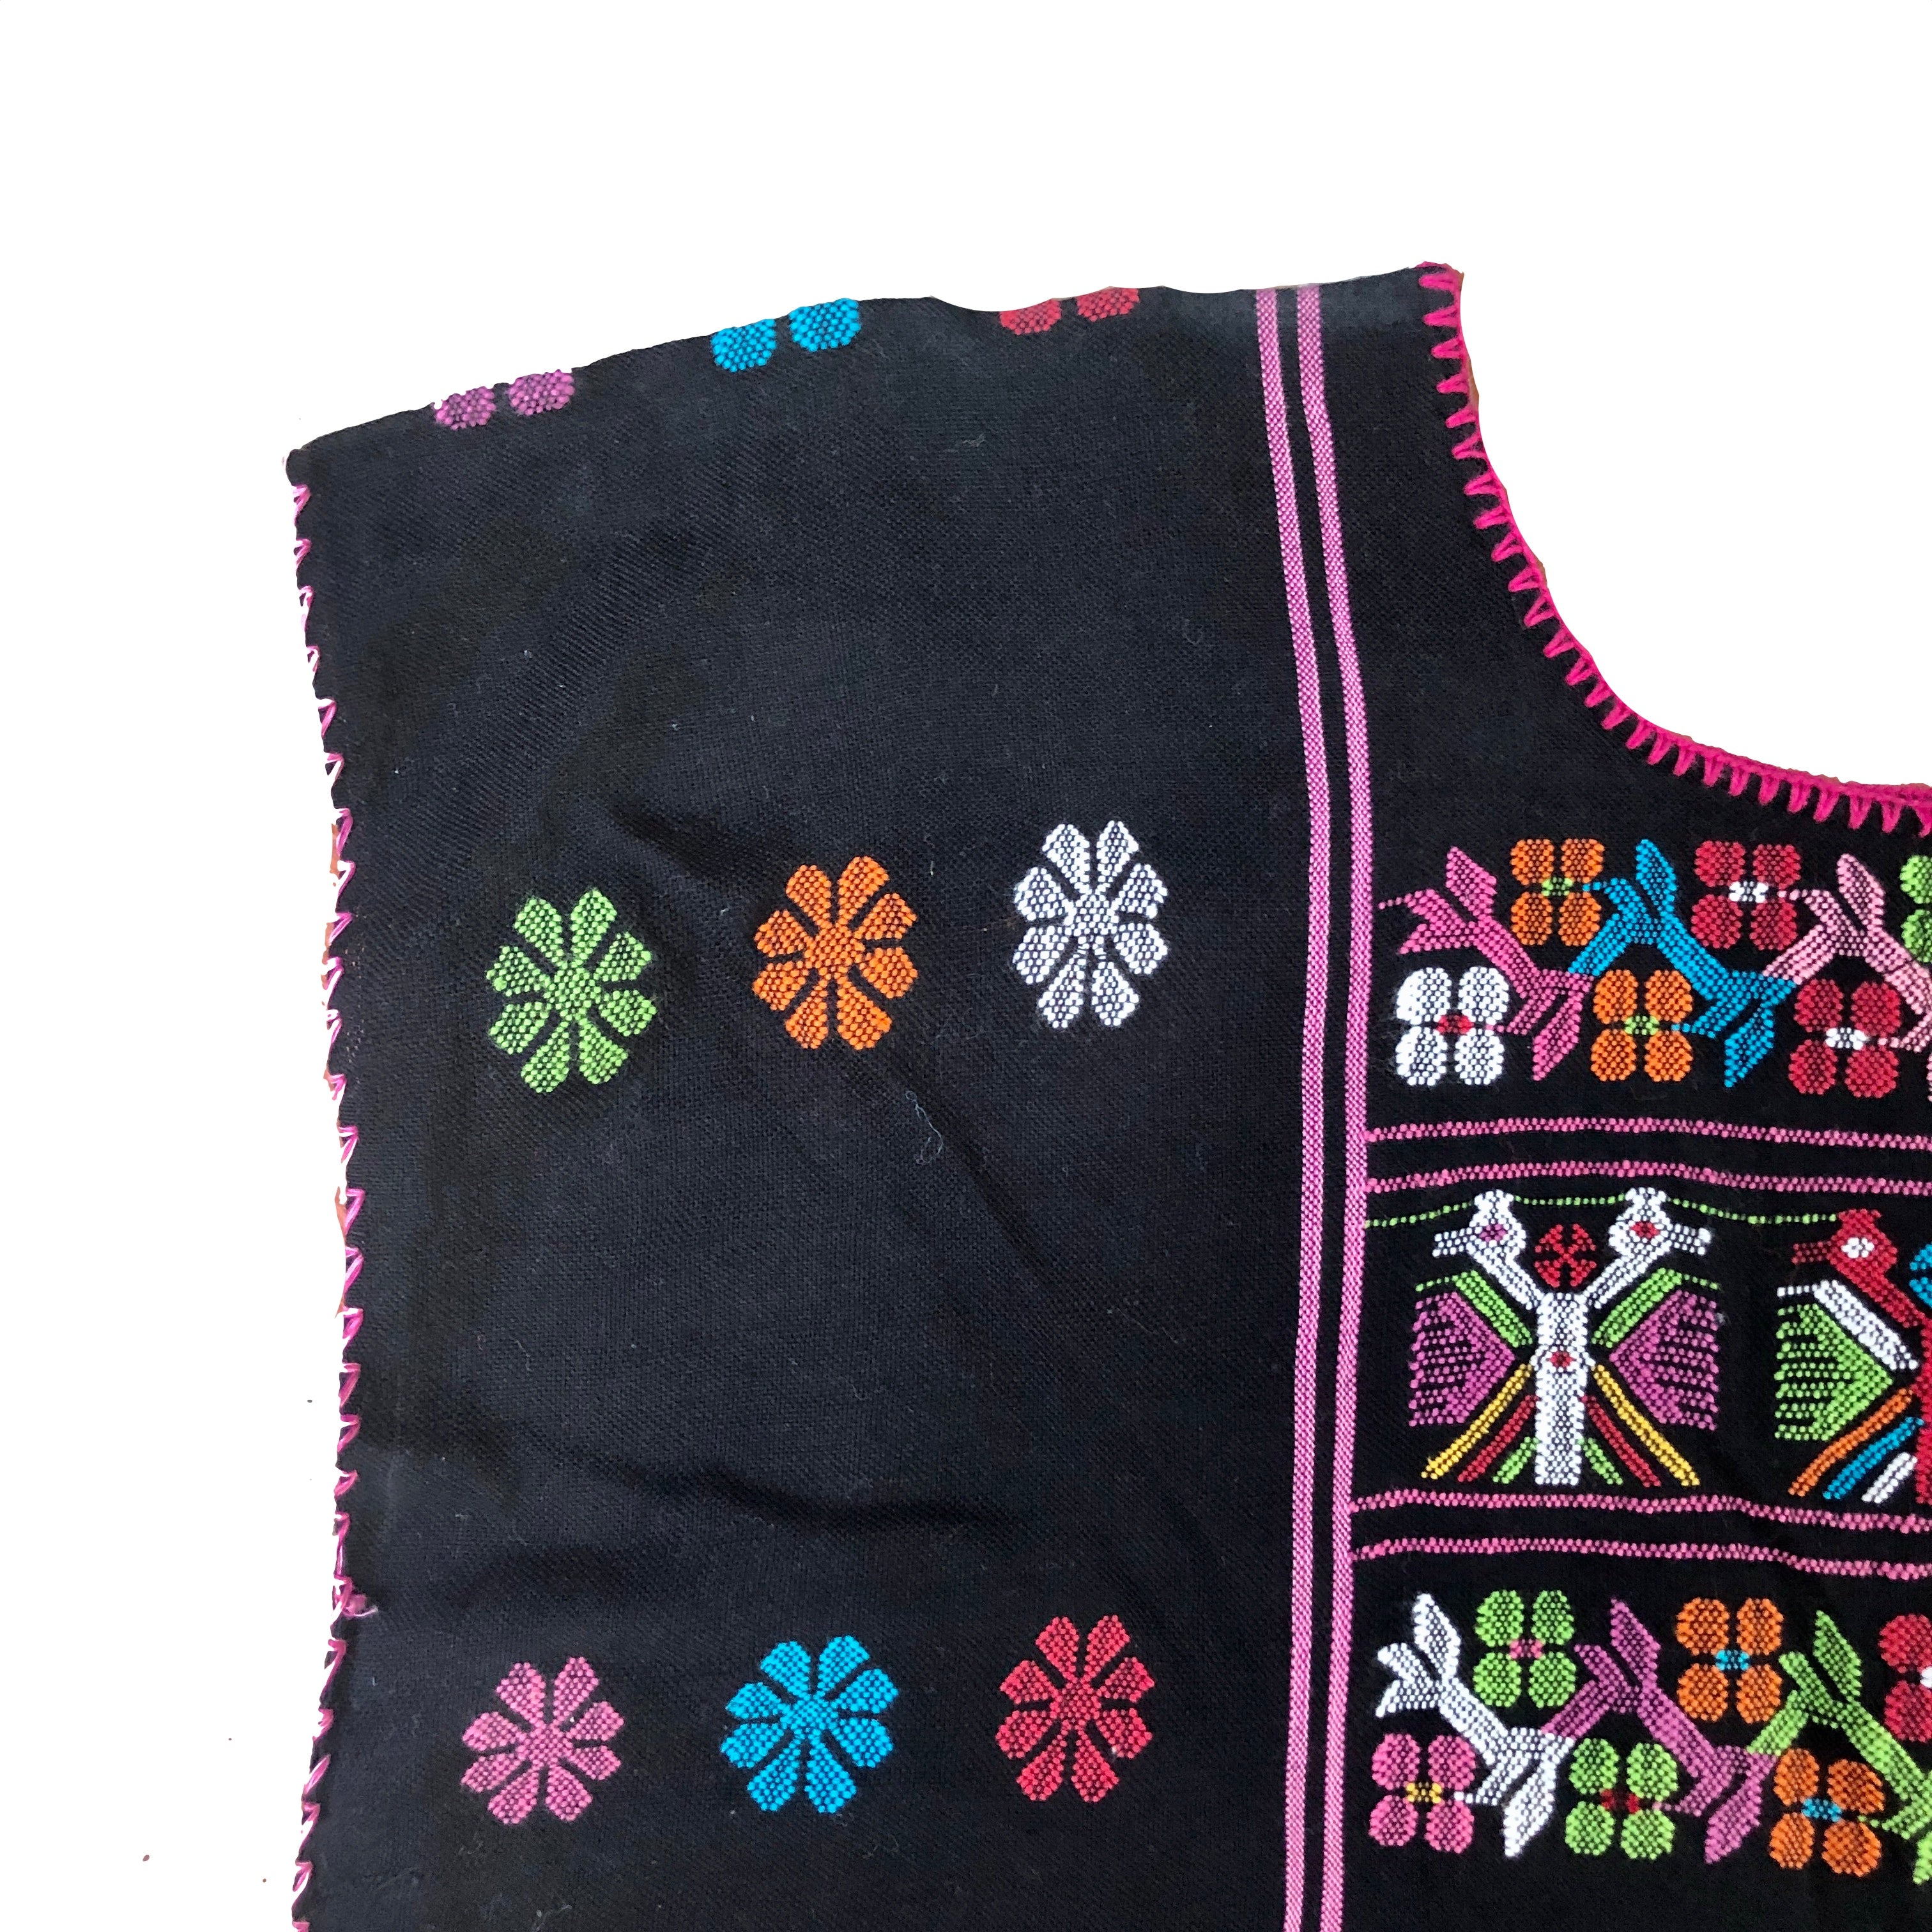 Hand made Black Huipil made in Oaxaca, Mexico